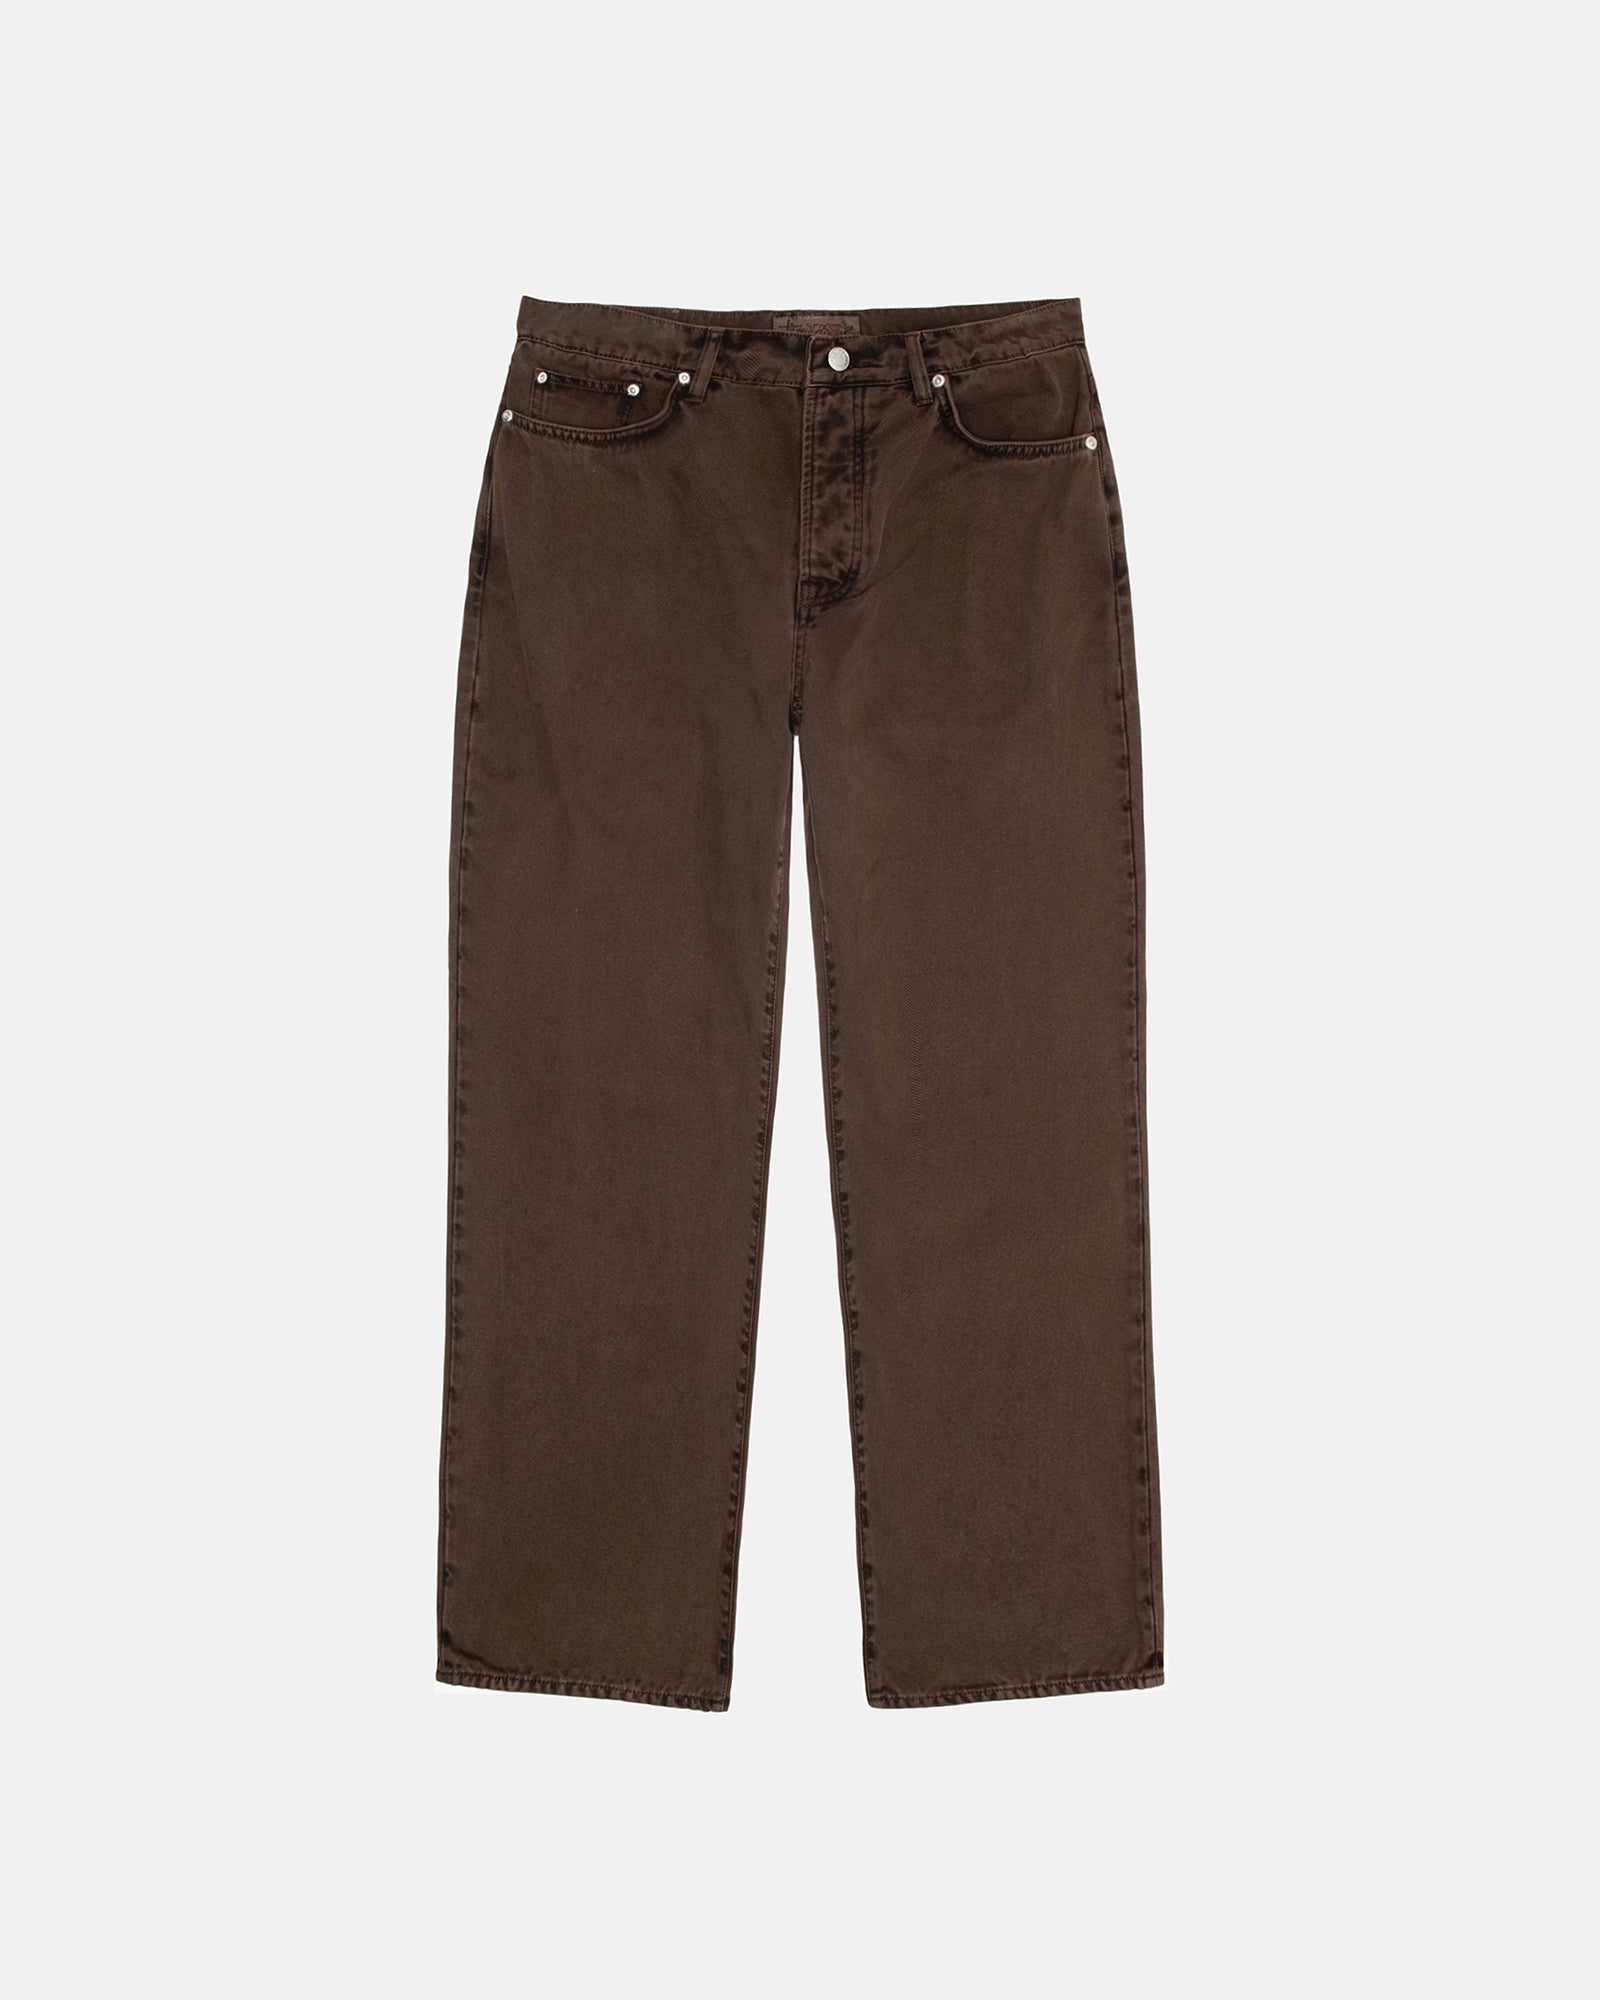 Classic Jean Washed Canvas in brown – Stüssy Japan